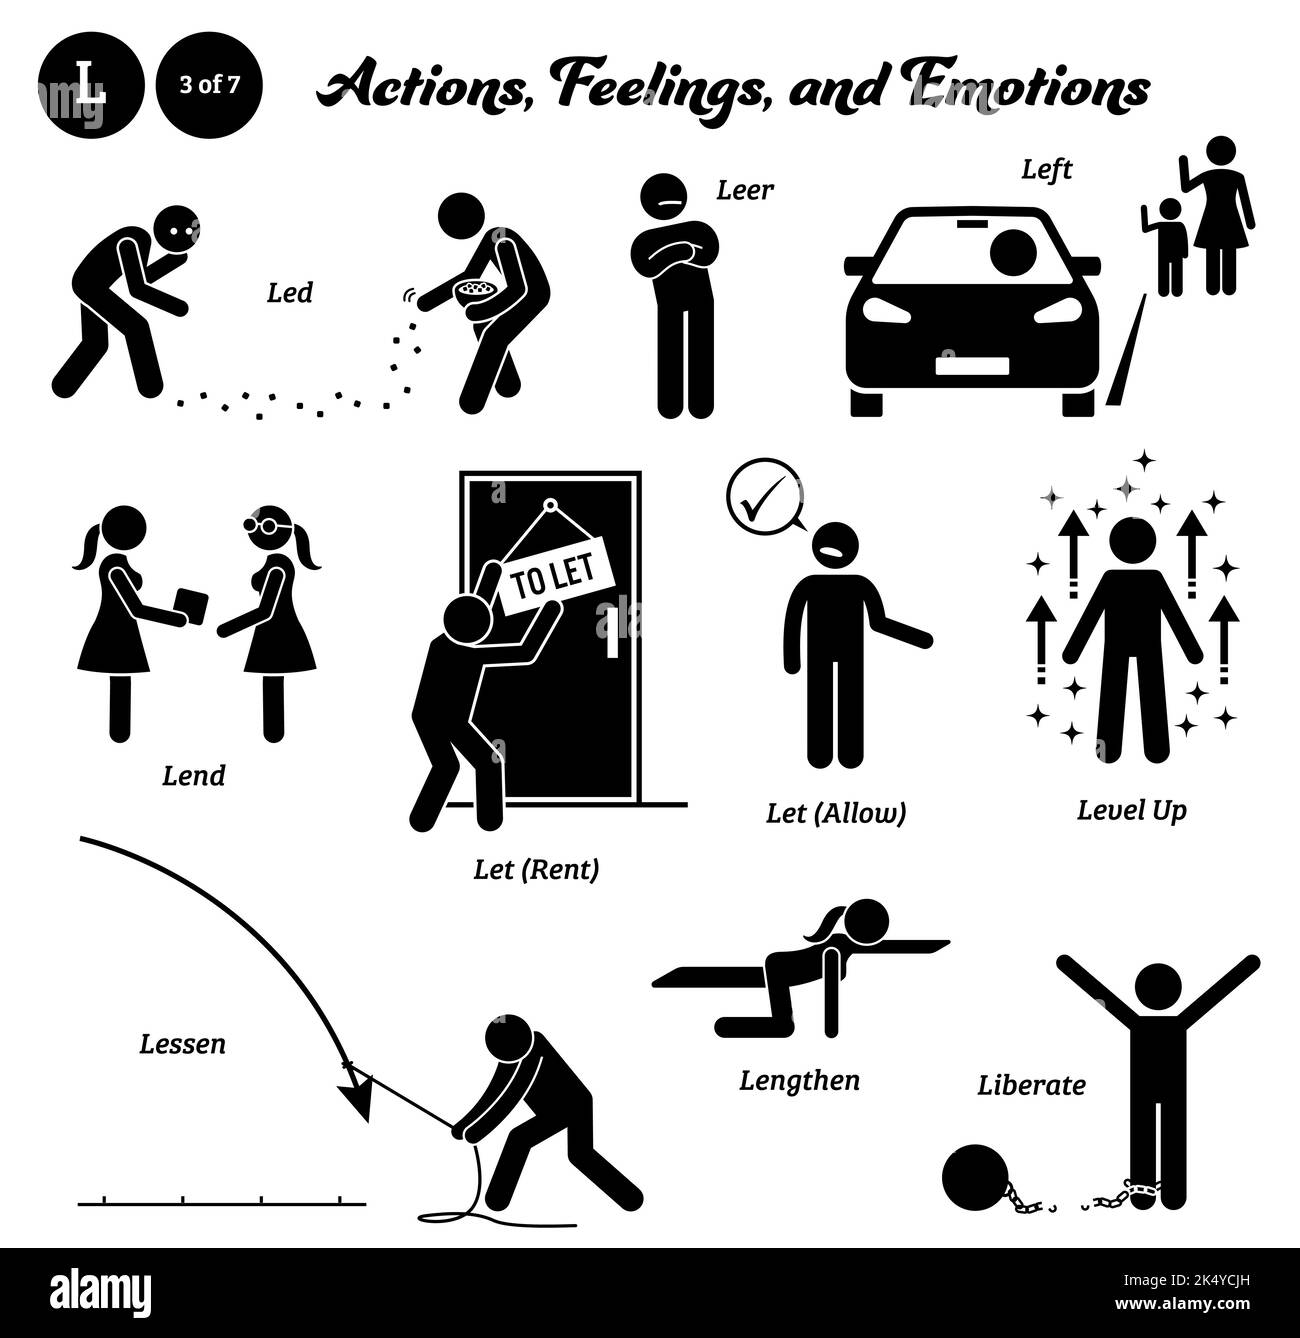 Stick figure human people man action, feelings, and emotions icons alphabet L. Led, leer, left, lend, let, rent, allow, level up, lessen, lengthen, an Stock Vector